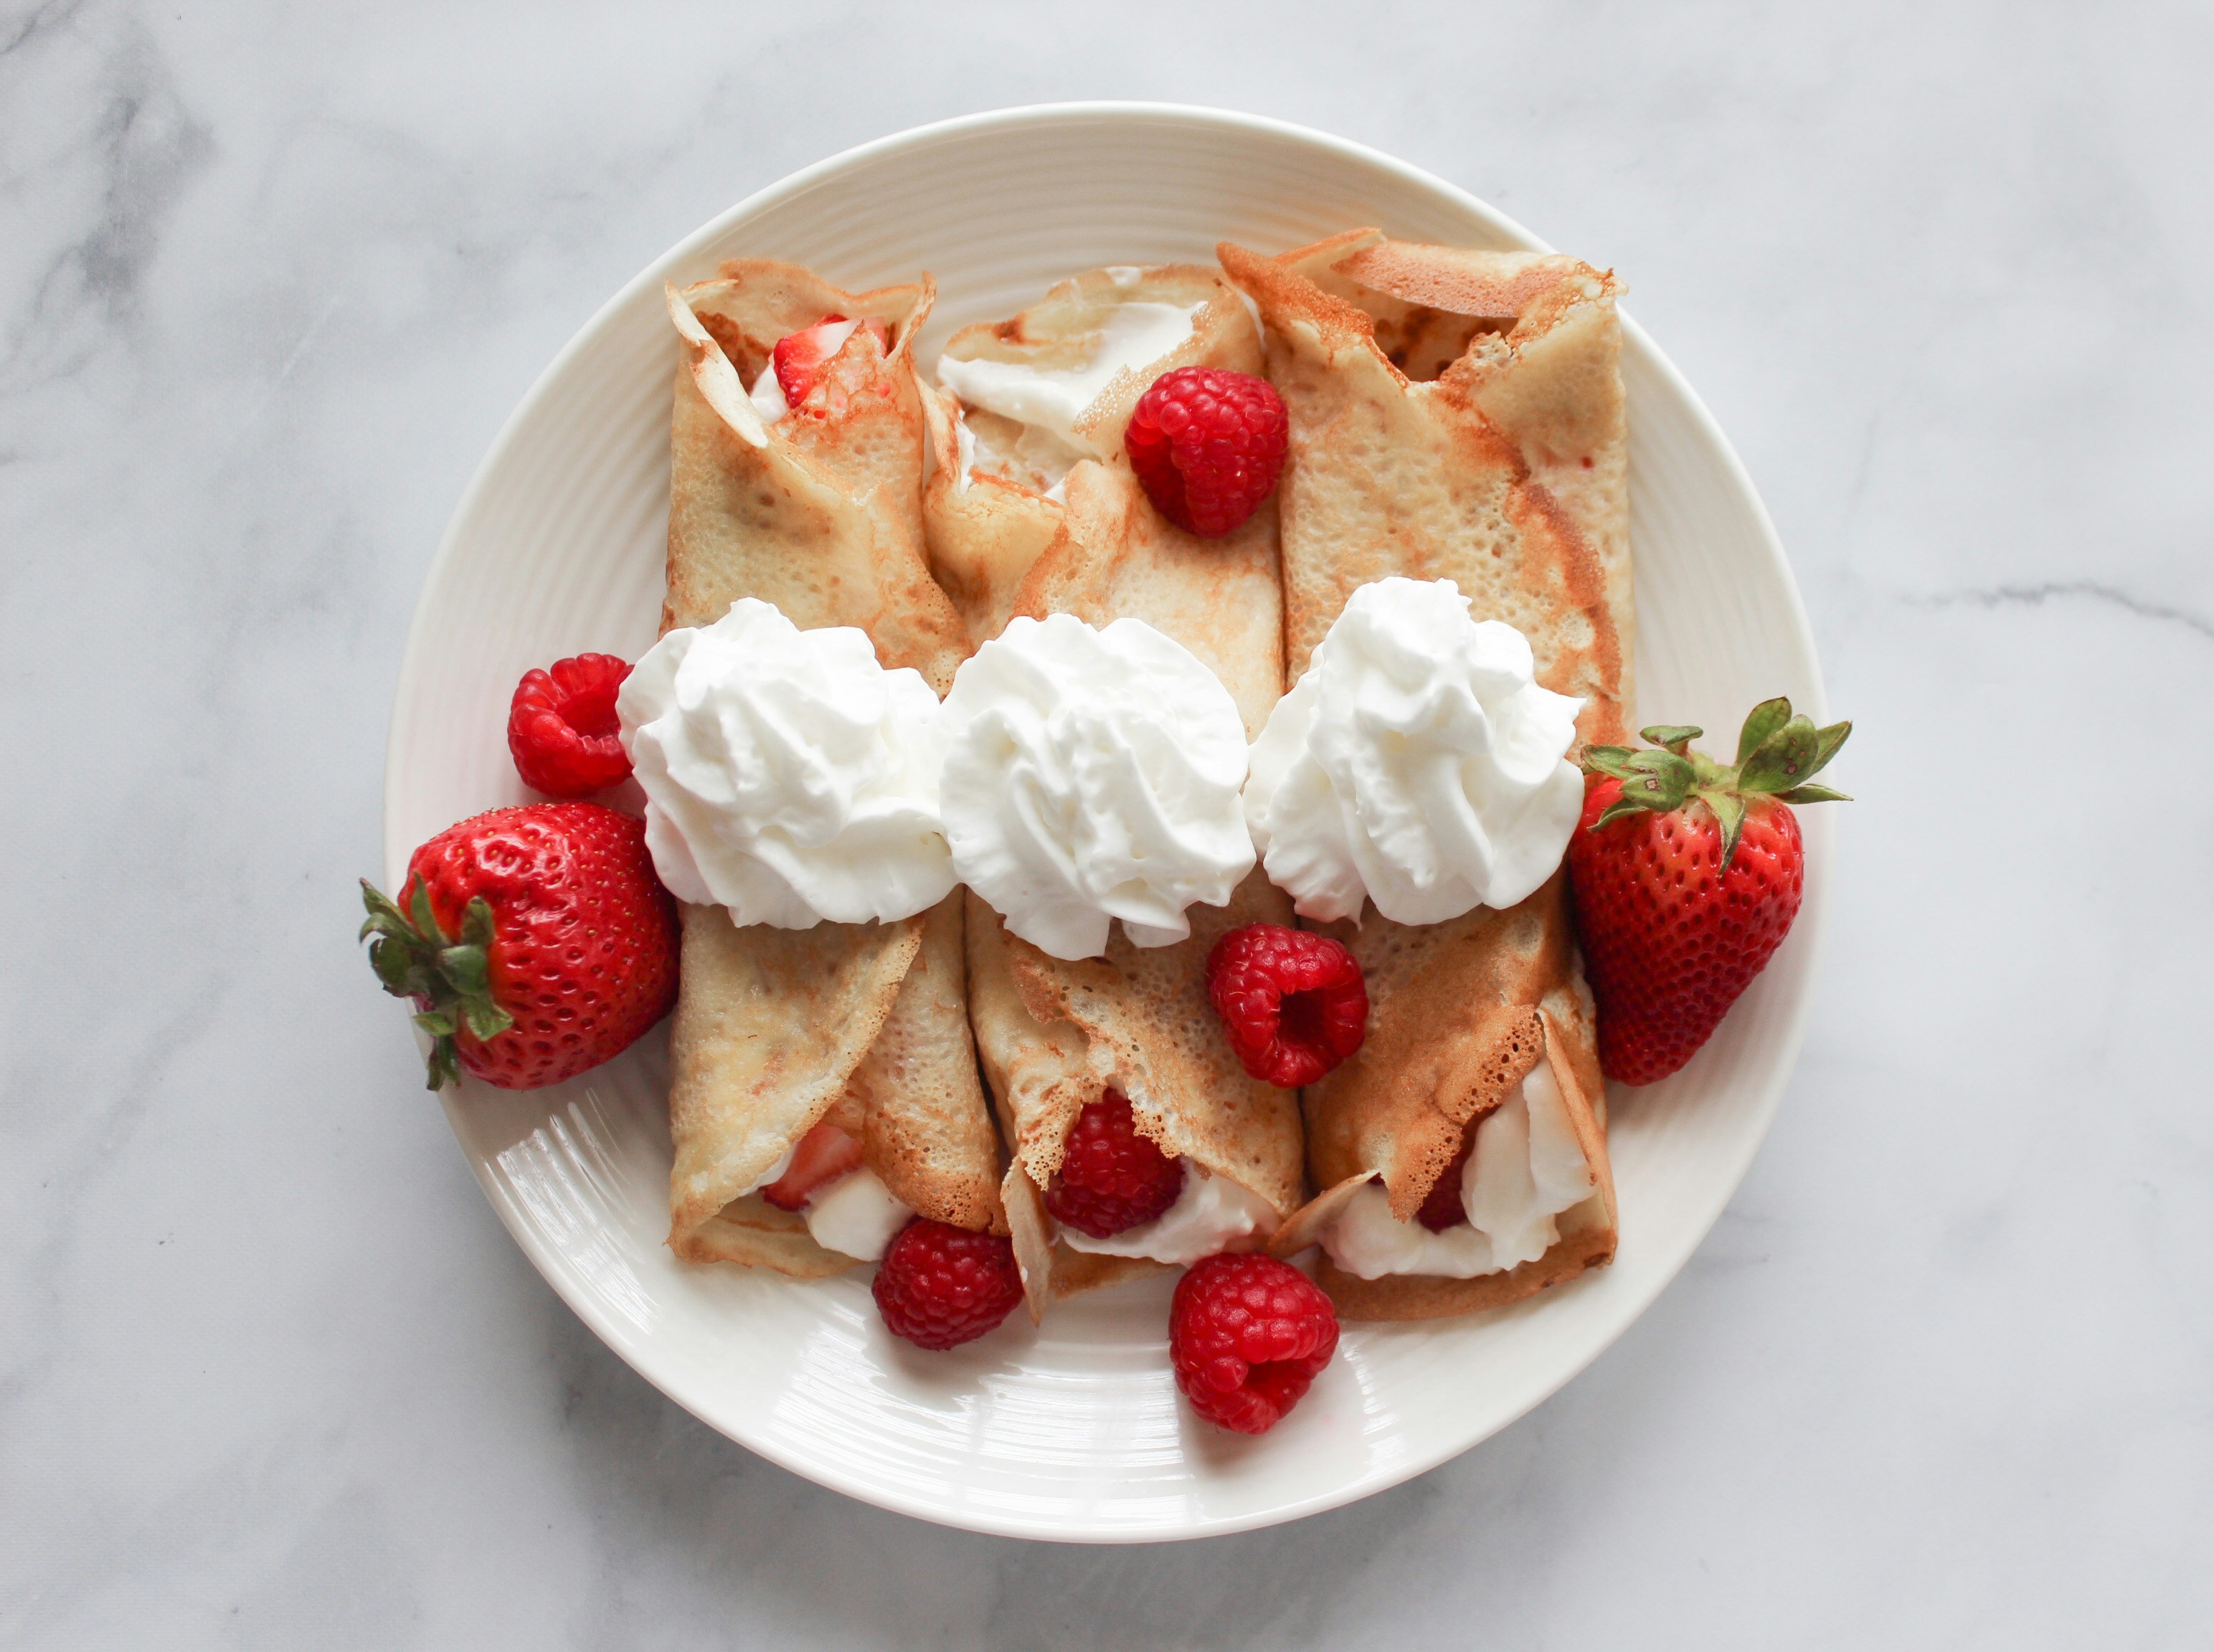 Three crepes topped with strawberries and whipped cream